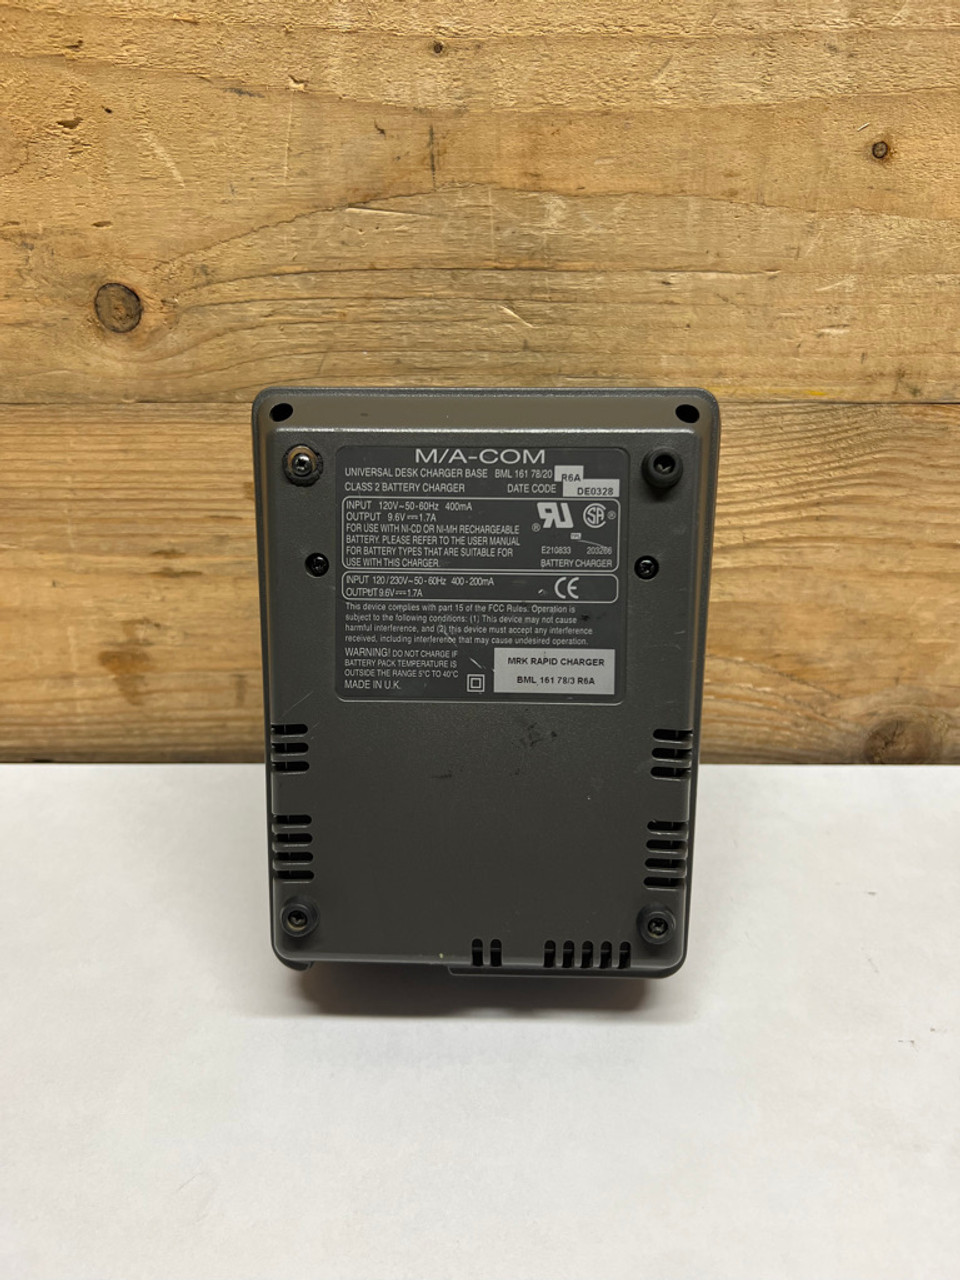 Universal Radio Charger Base BML 161 78/3 R6A M/A-COM